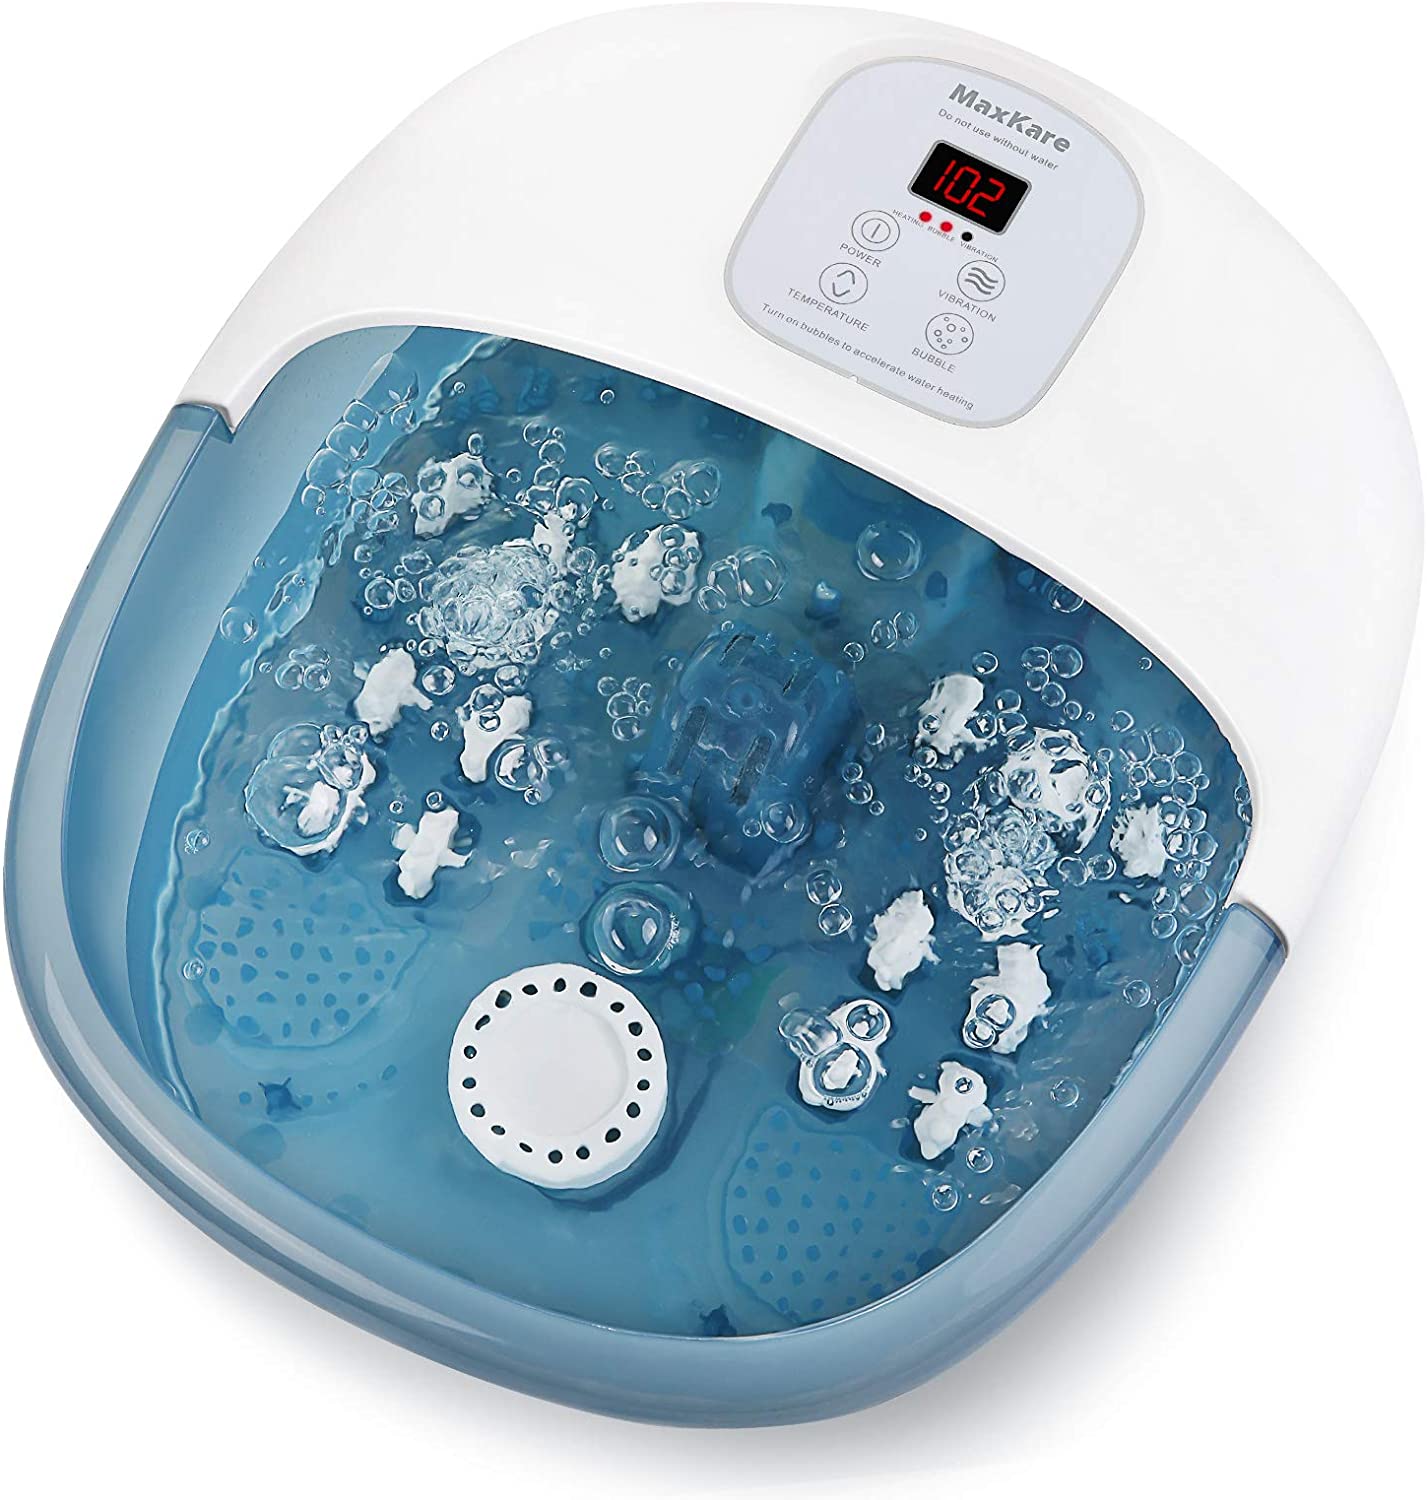 MaxKare Foot Bath Massager with 14 Massage Rollers and Heated Bubbles  Vibration – MAXKARE